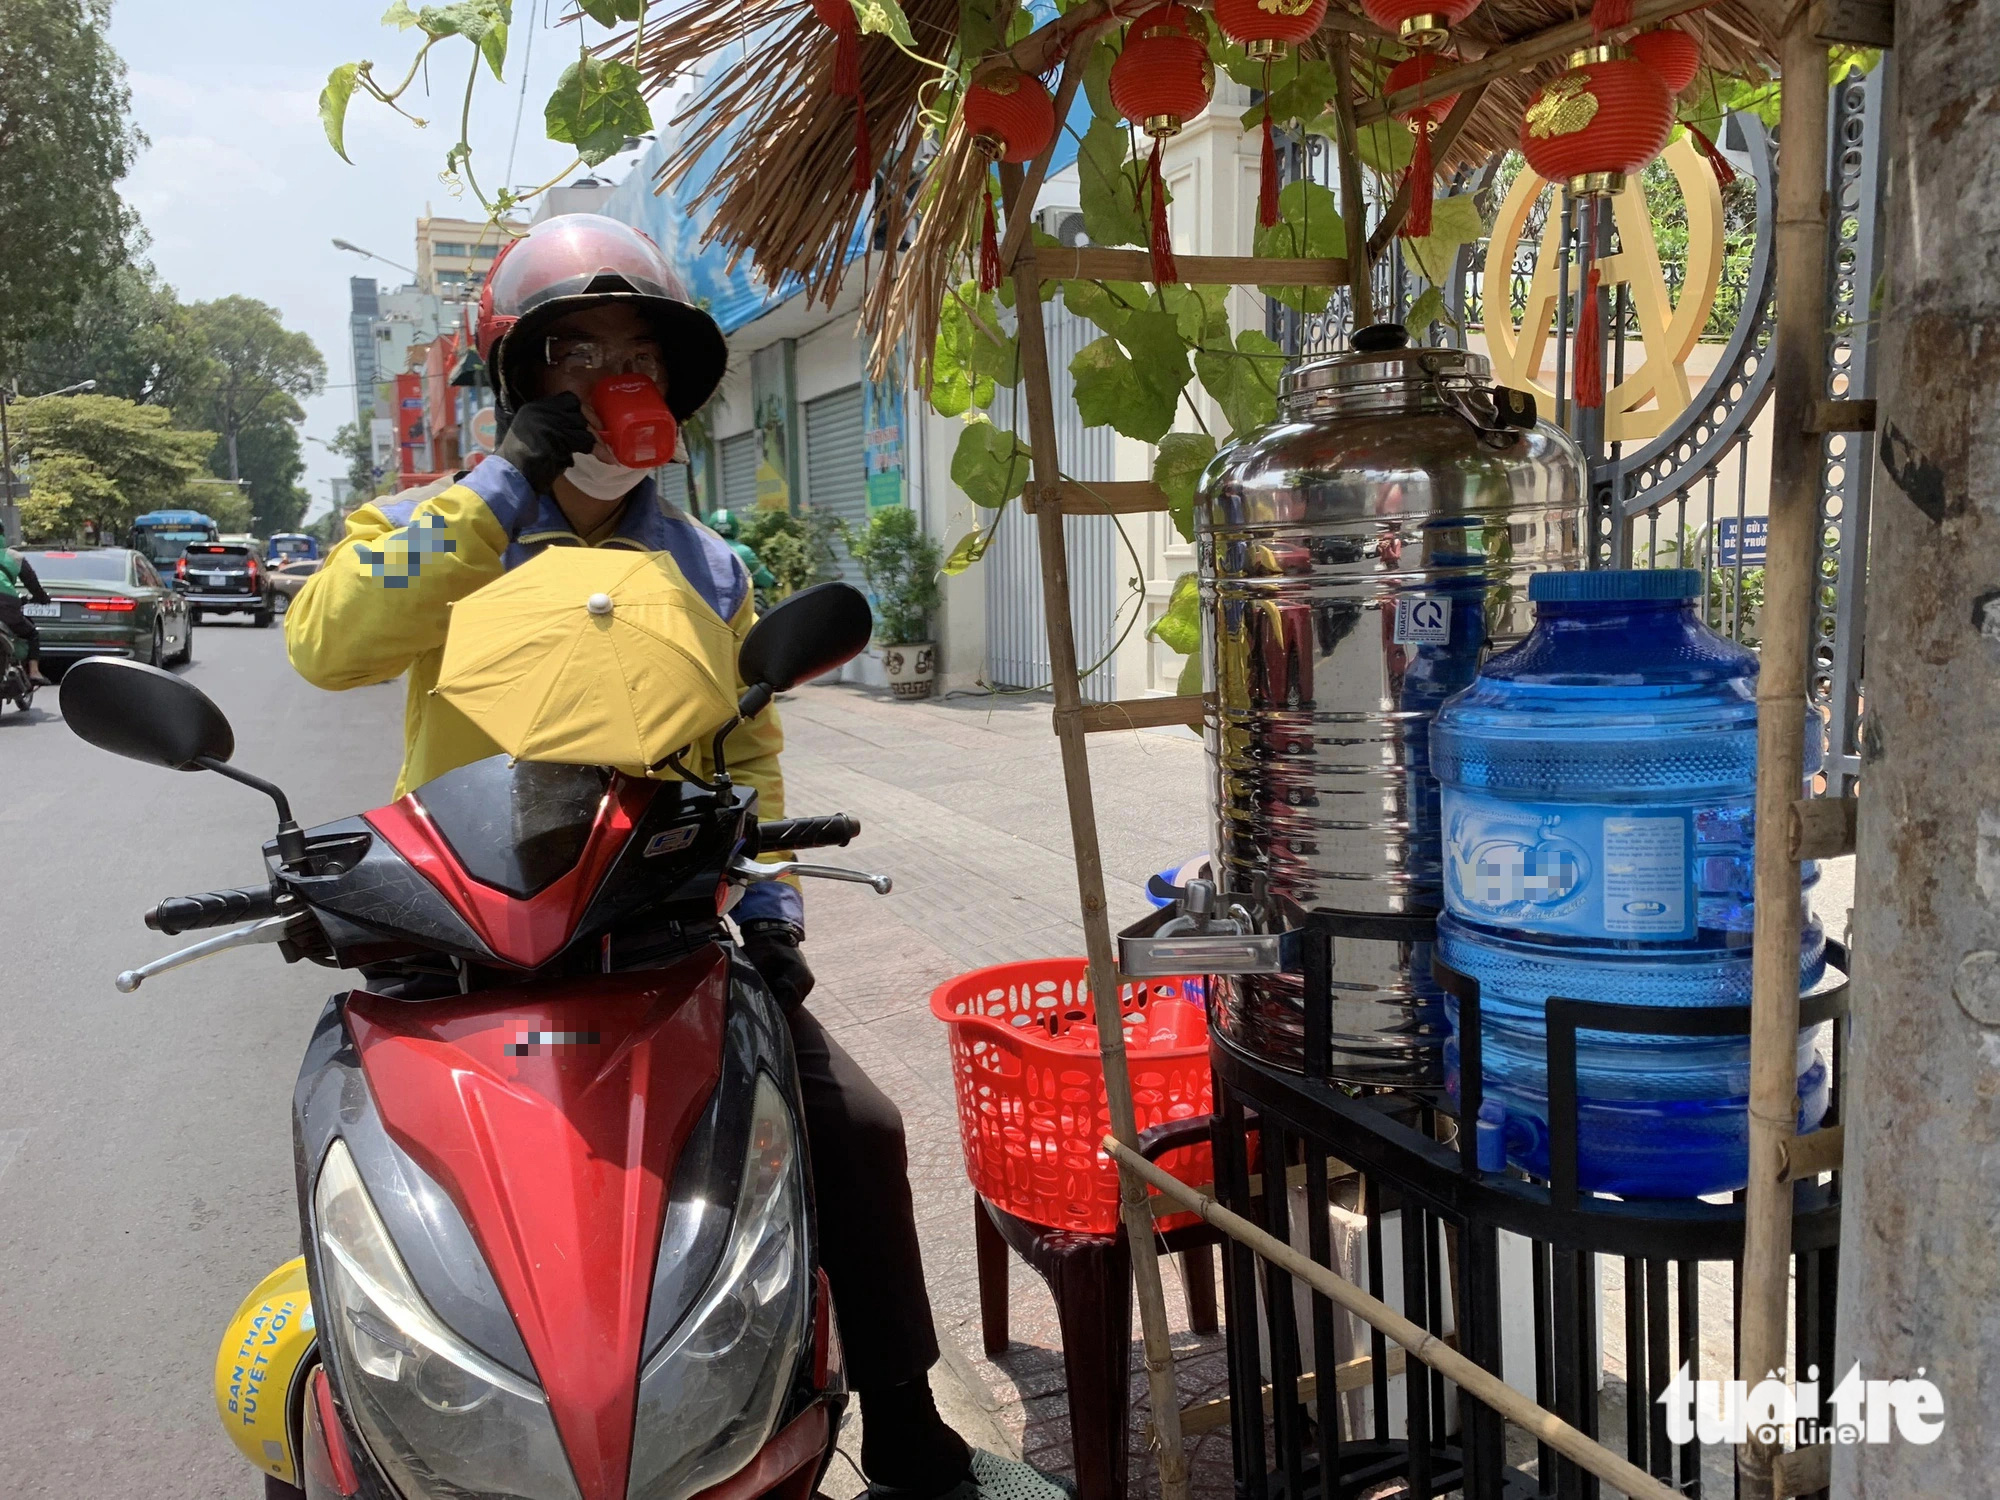 A motorbike ride-hailing drivers drinks from vine-shaded charity water tanks outside a church on Nguyen Thi Minh Khai Street in District 1, Ho Chi Minh City. Photo: Hien Anh / Tuoi Tre